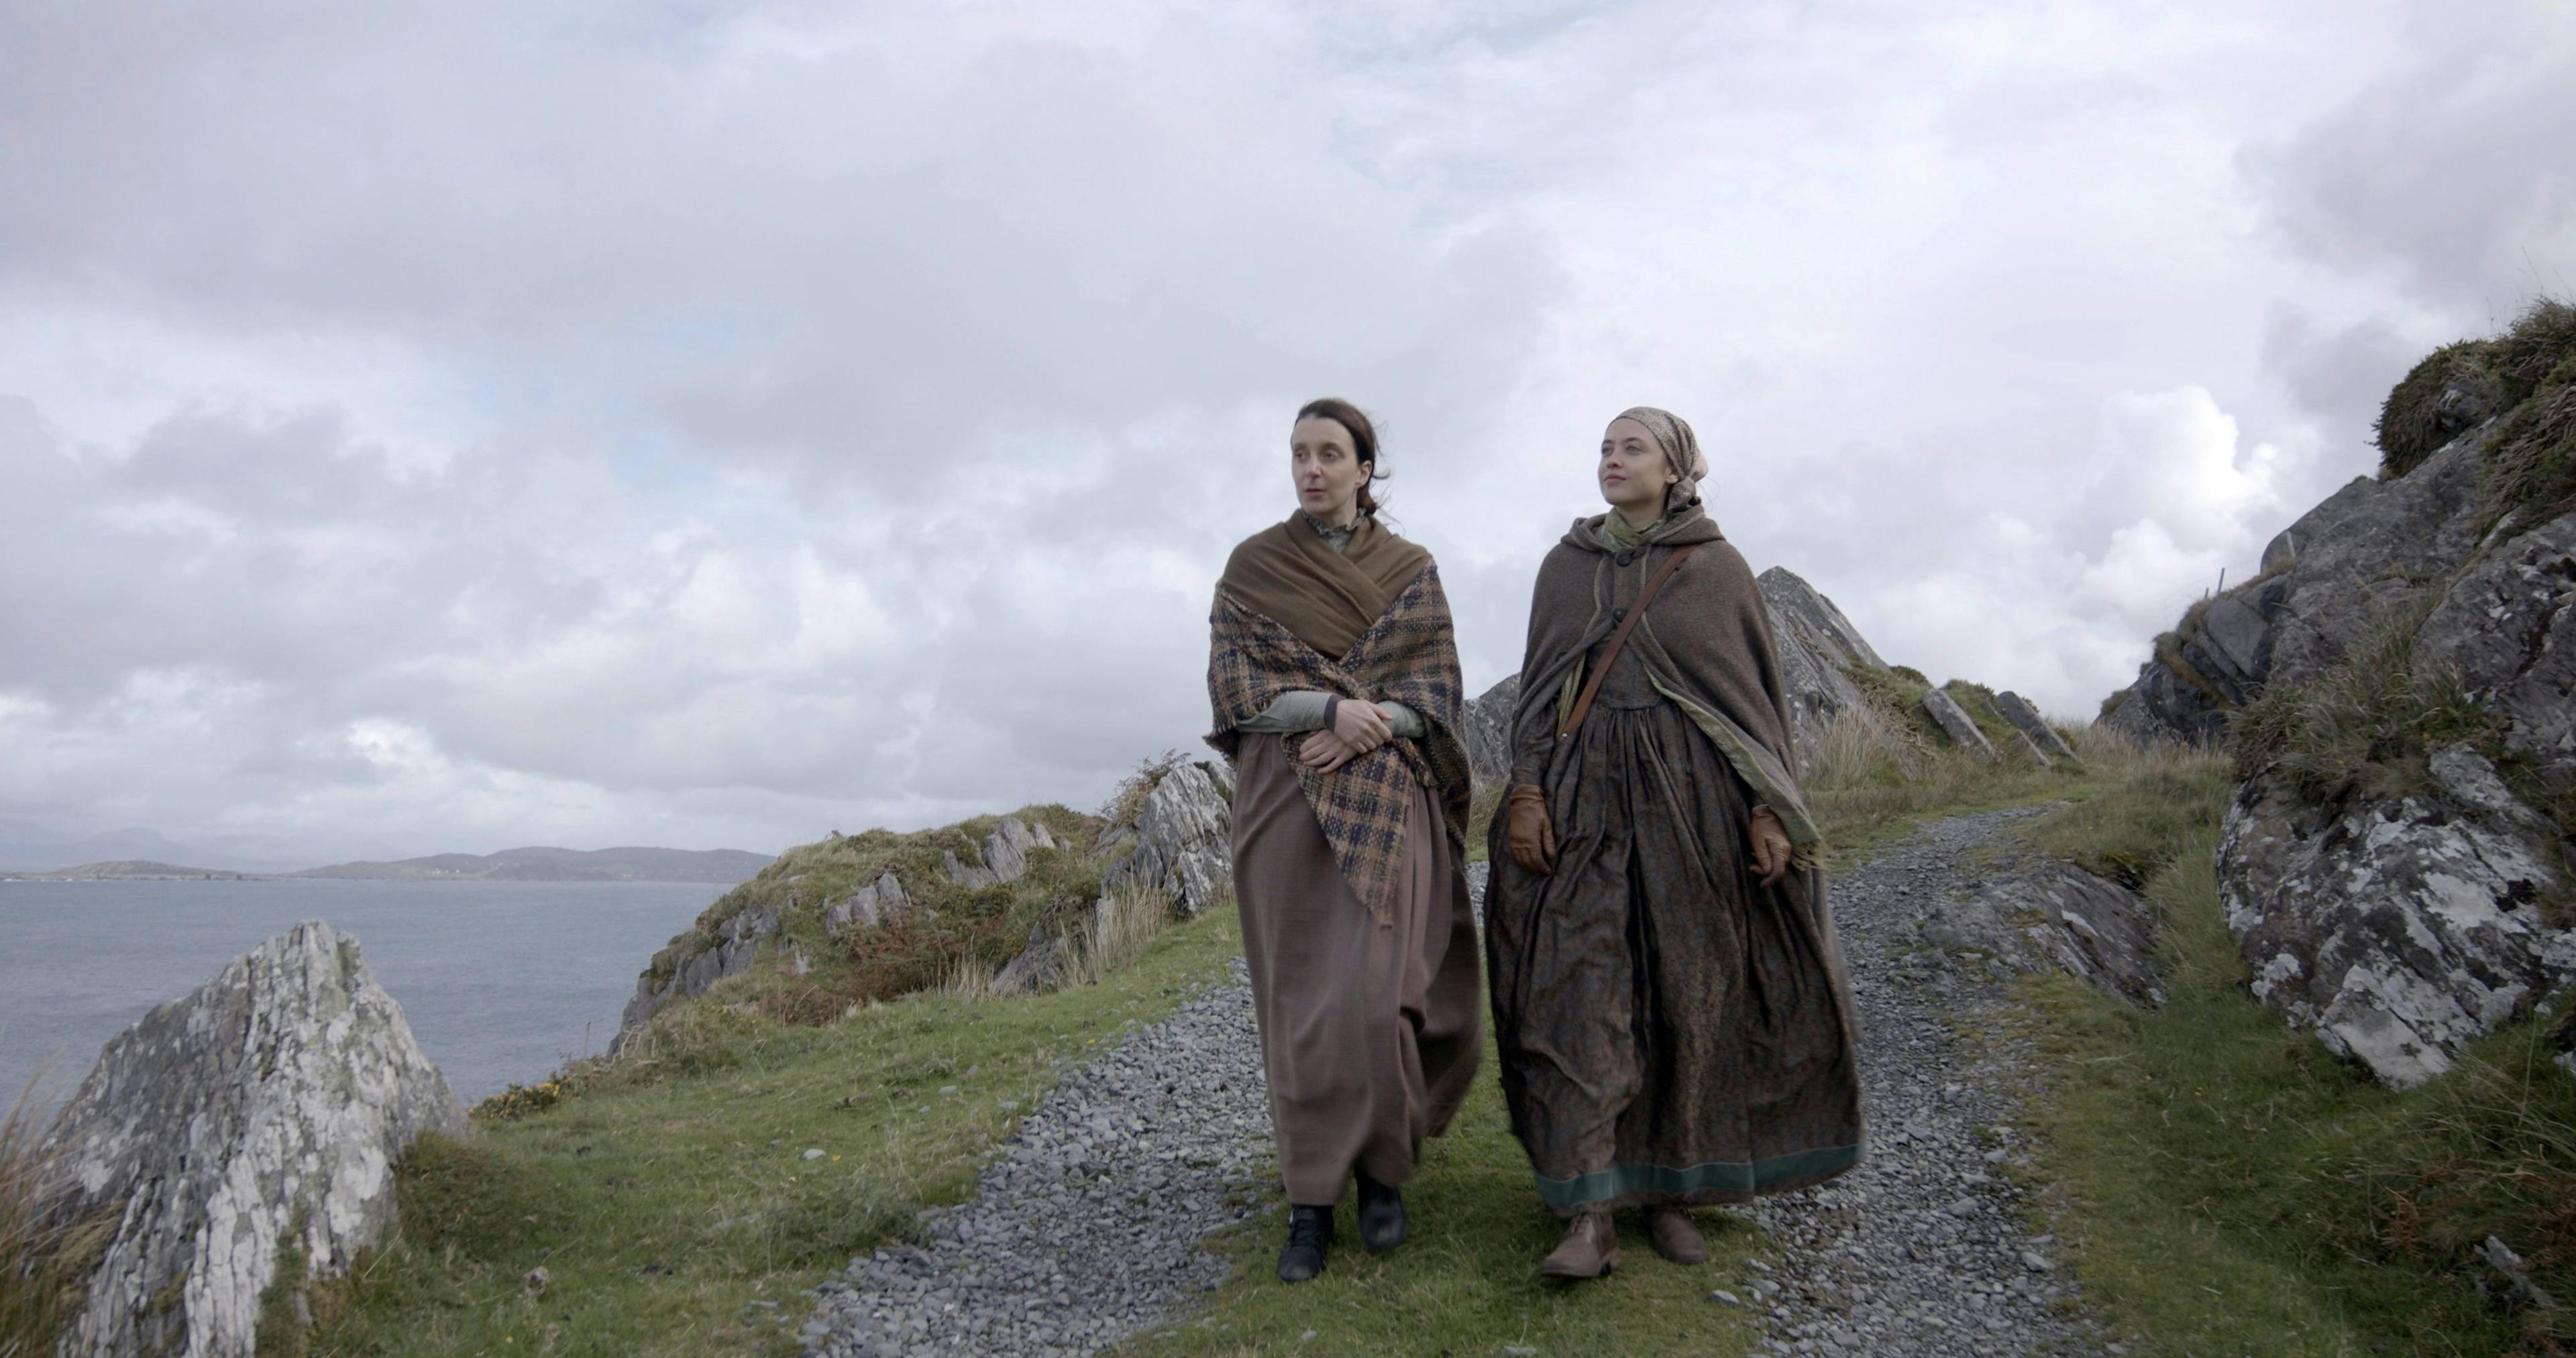 Two women in brown cloaks walk along a stone path by the sea.